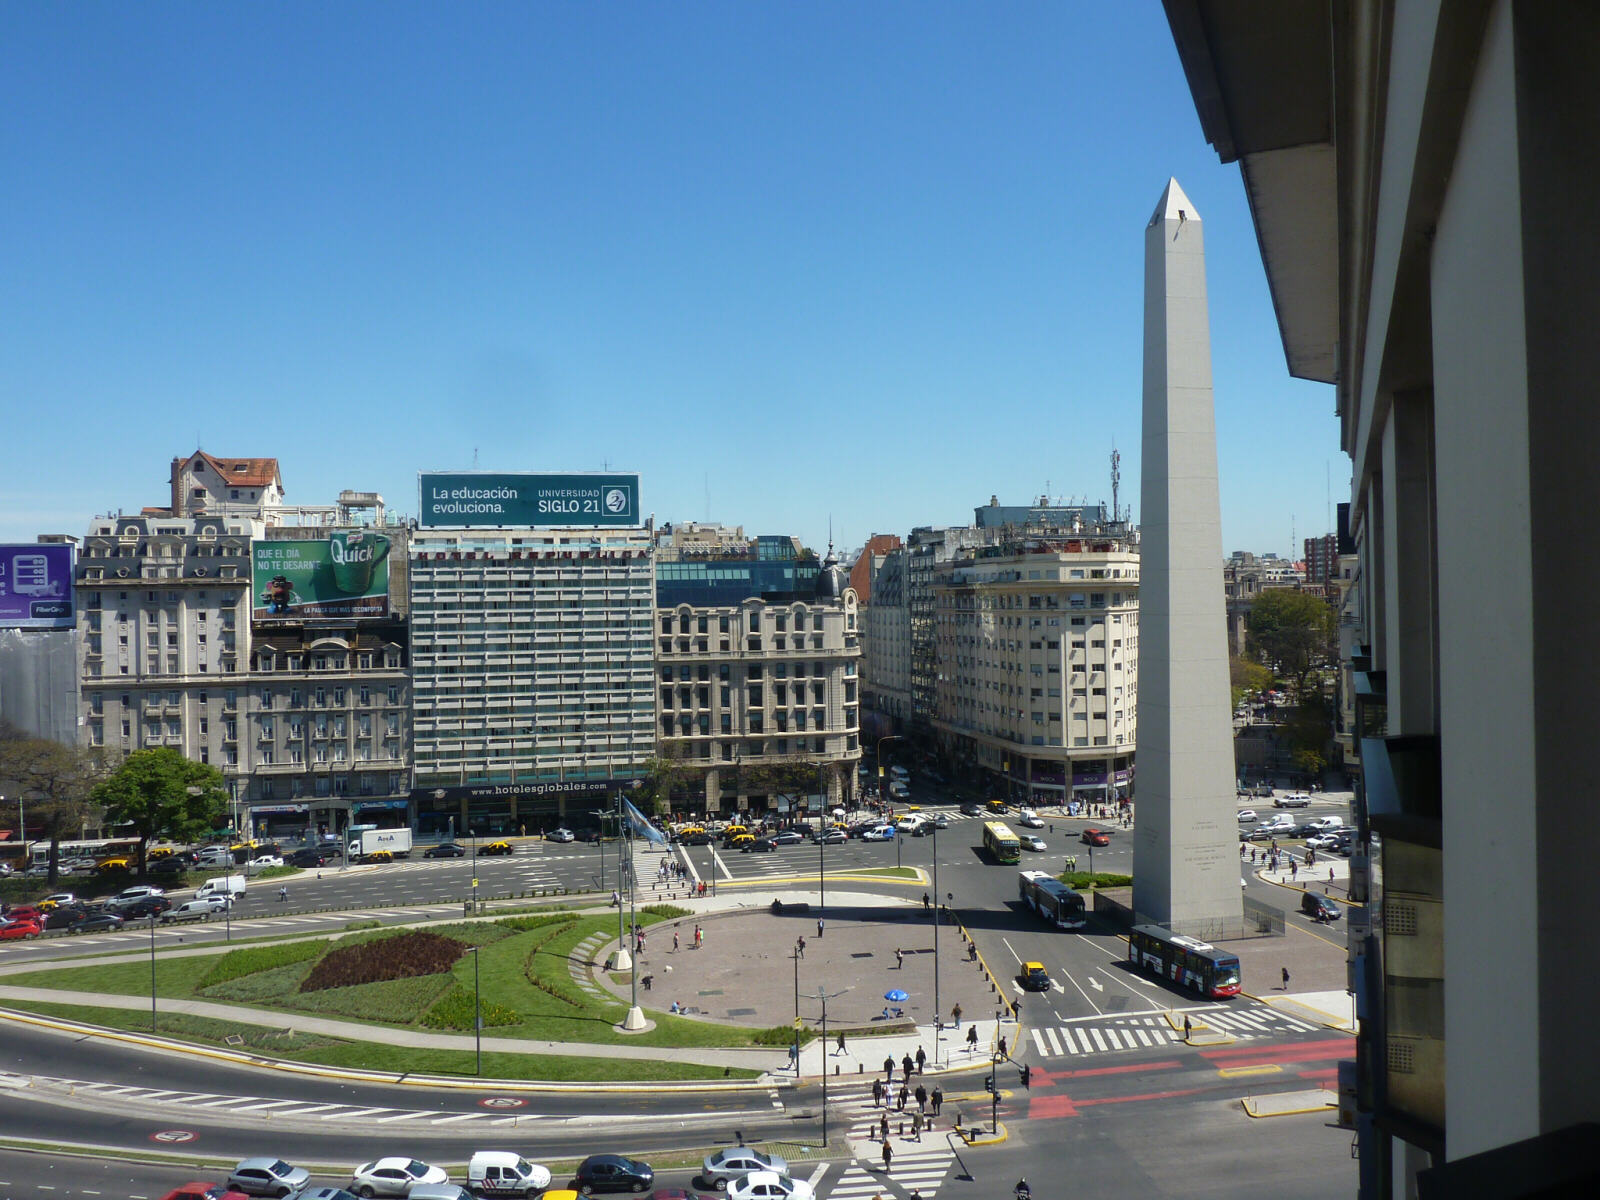 The Obelisk in Buenos Aires, Argentina